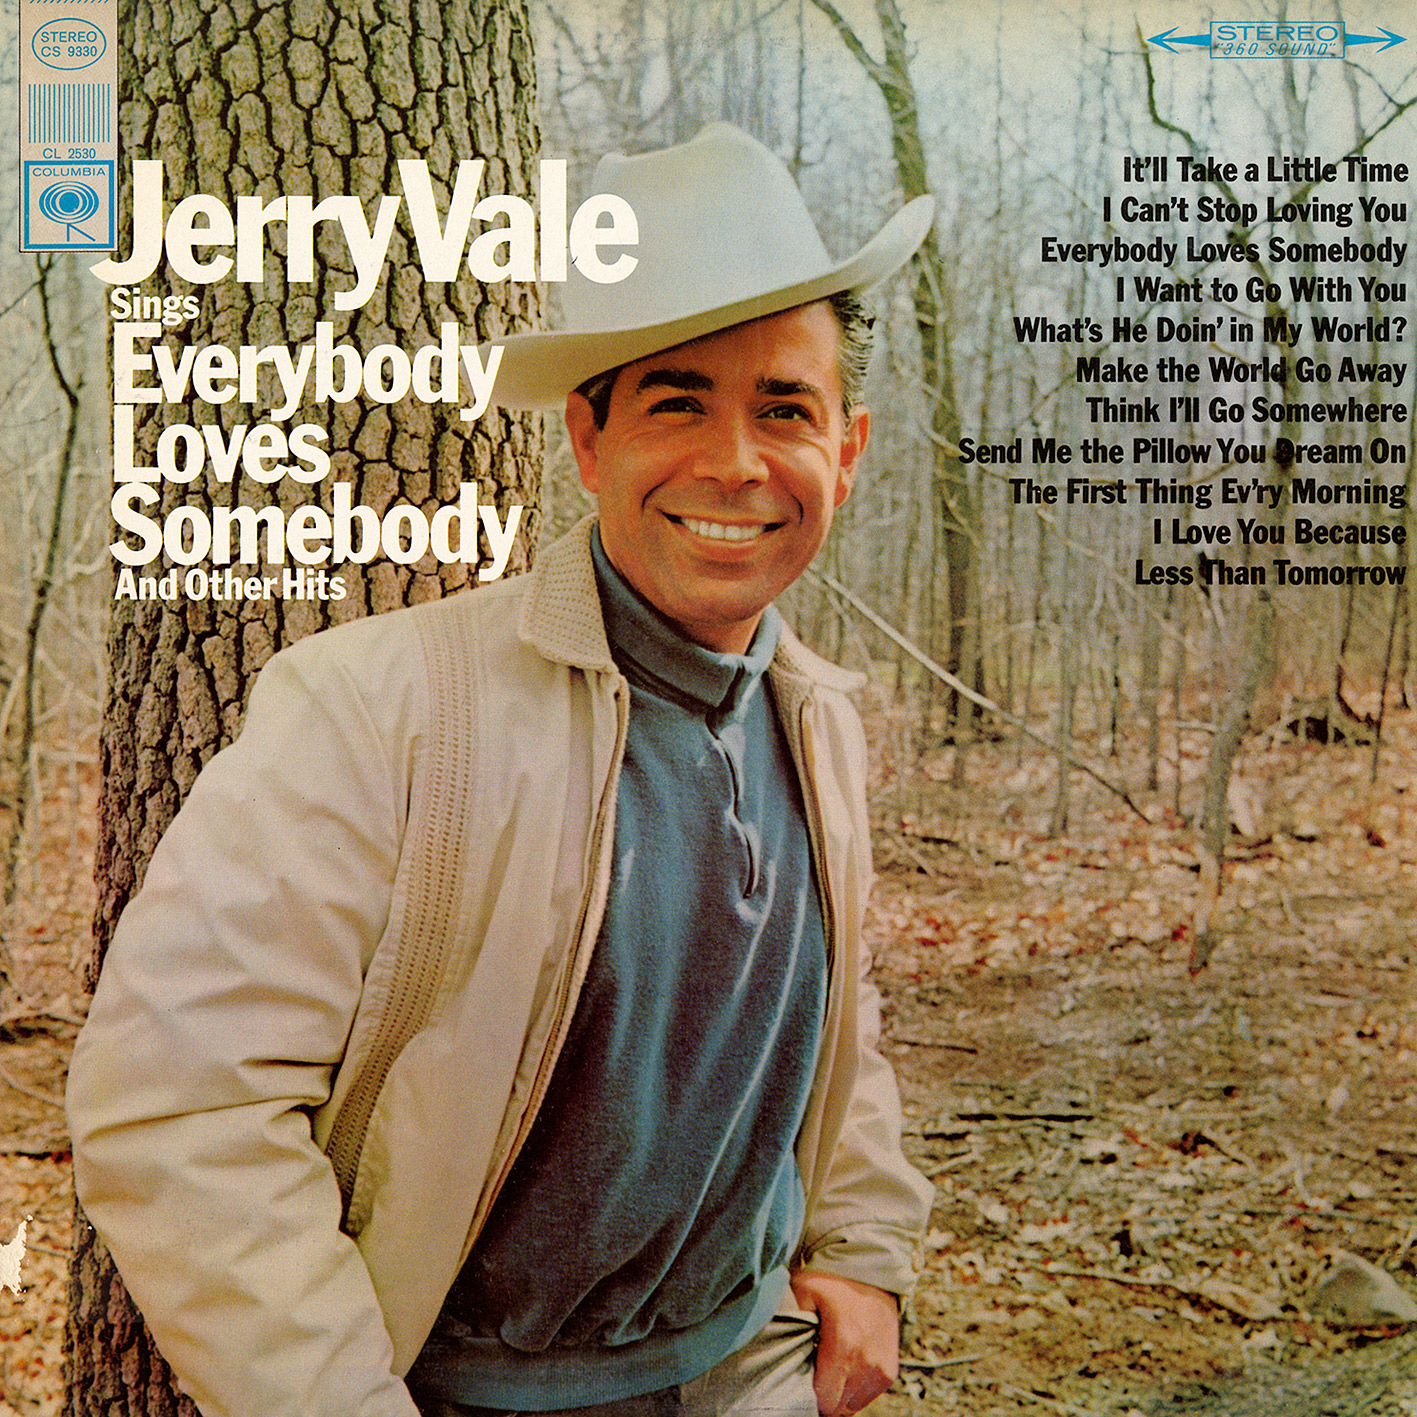 Jerry Vale – Sings Everybody Loves Somebody And Other Hits (1966/2016) [HDTracks FLAC 24bit/192kHz]